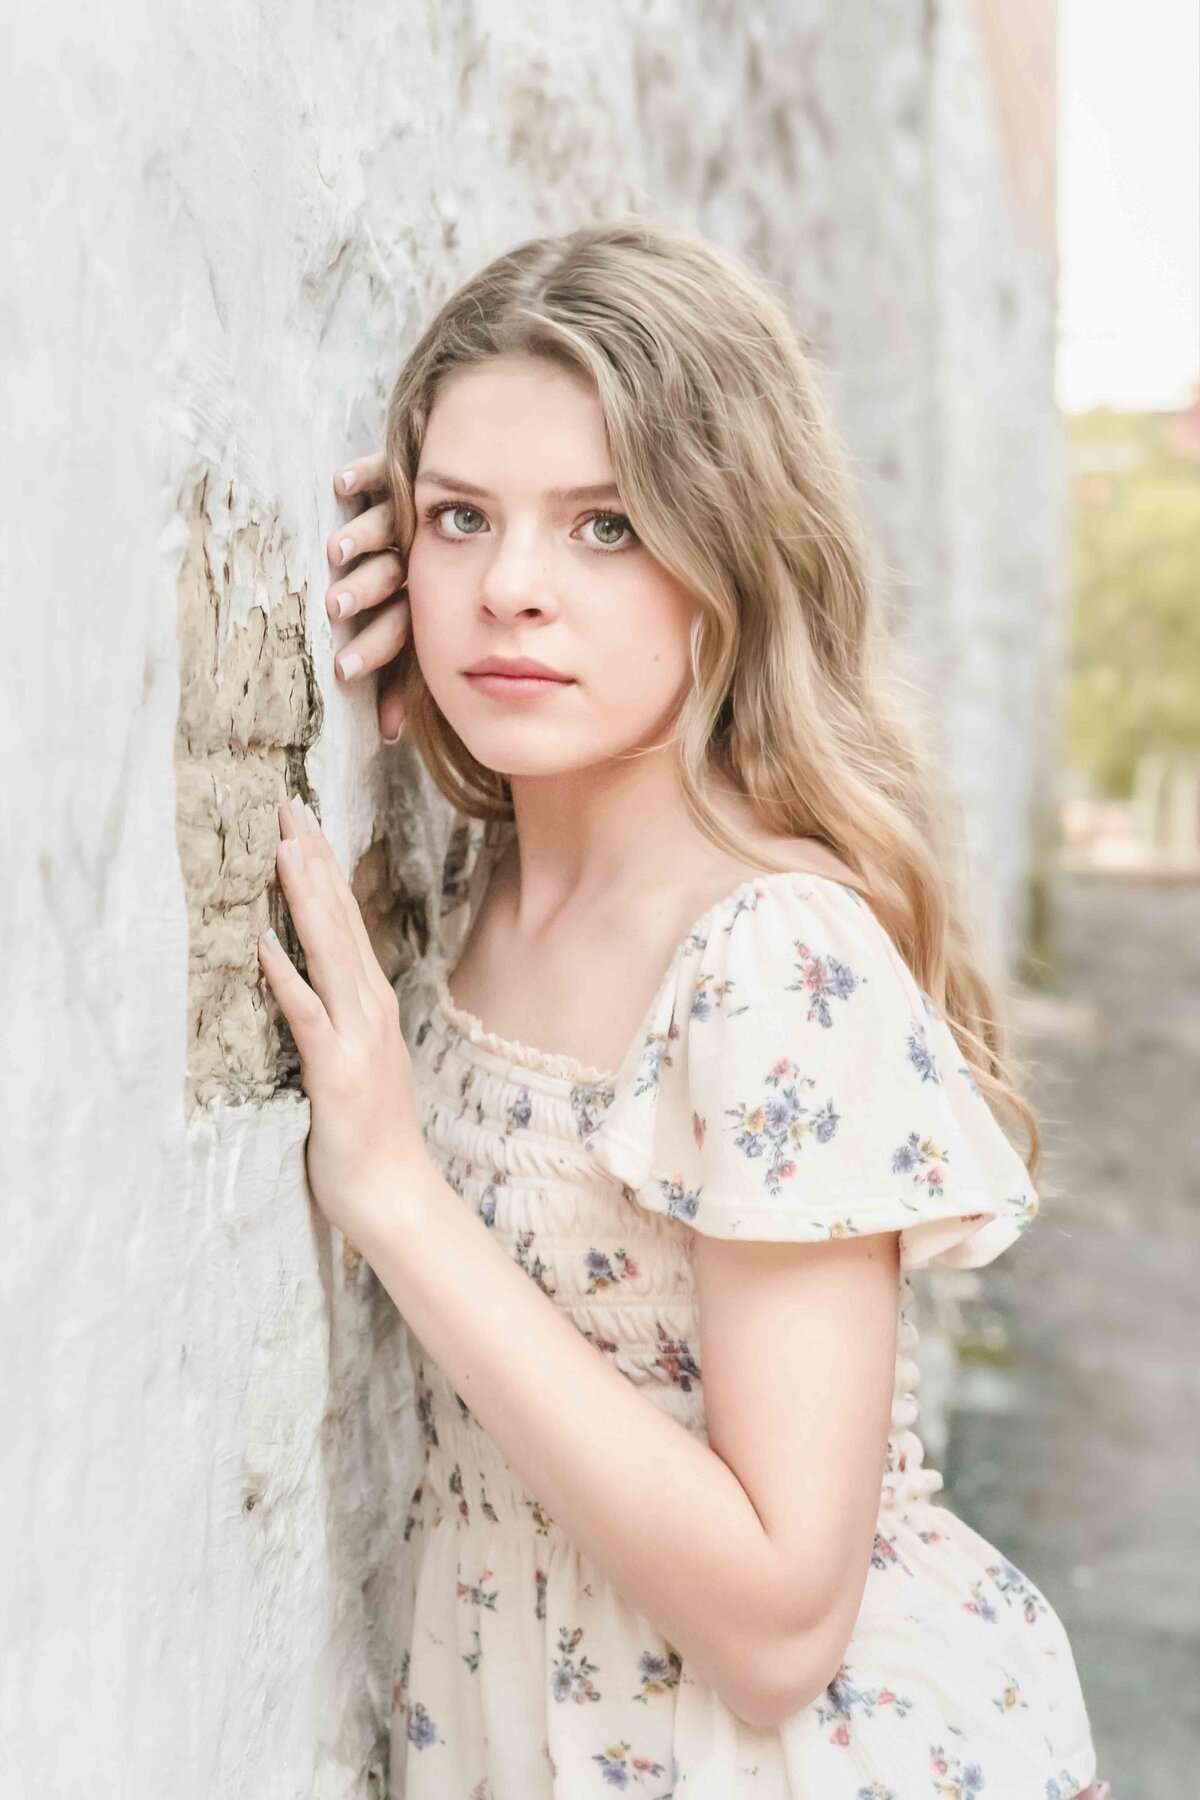 Teen girl leaning on a white brick wall